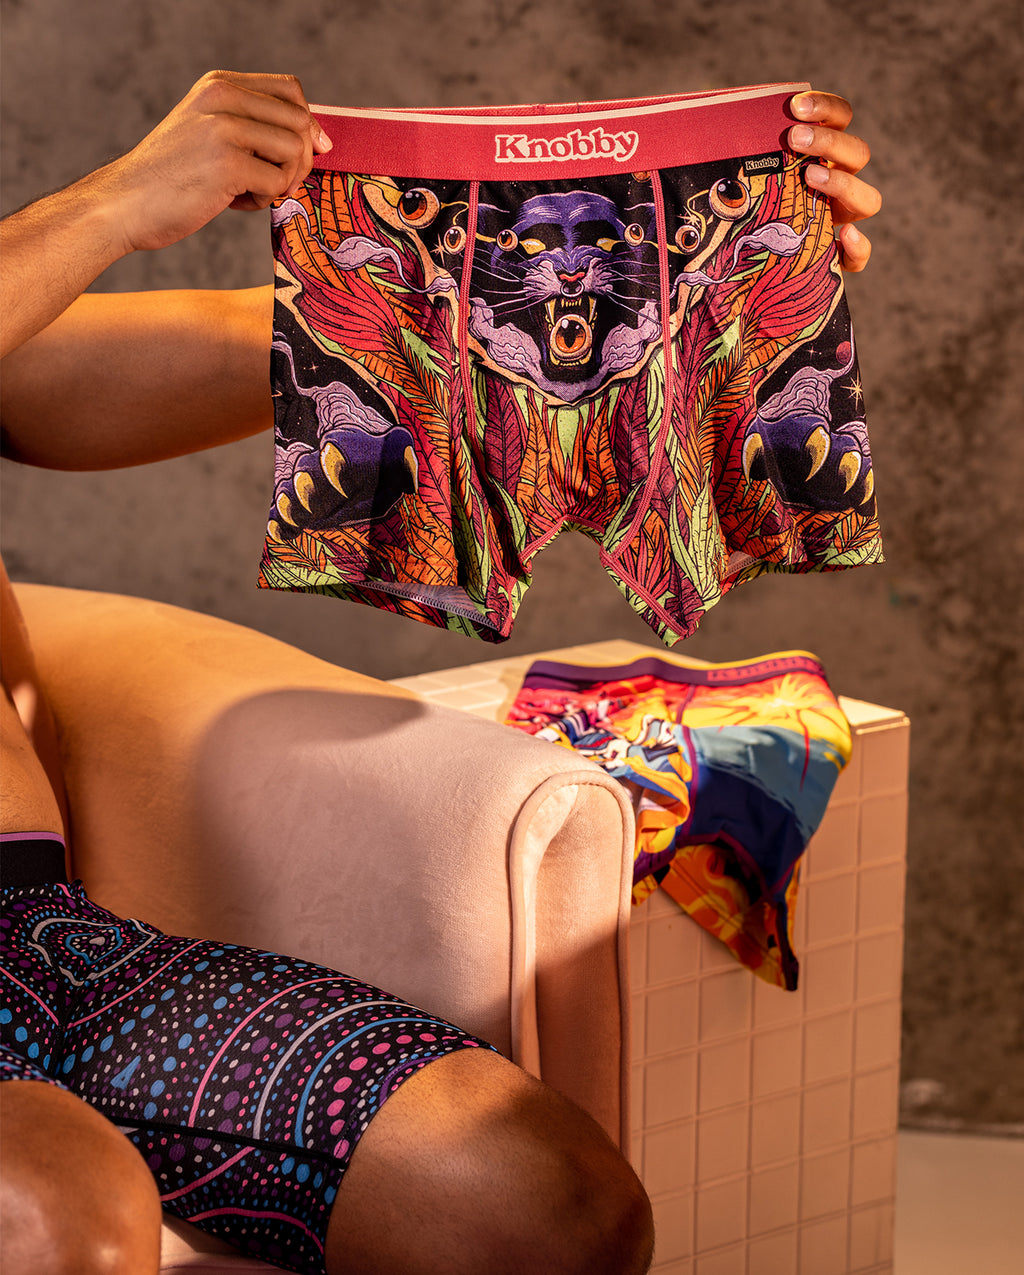 Knobby - In Brazil they just call these undies 🇧🇷 Have you tried the new  KNOBBY Brazilian yet? www.knobby.com/womens